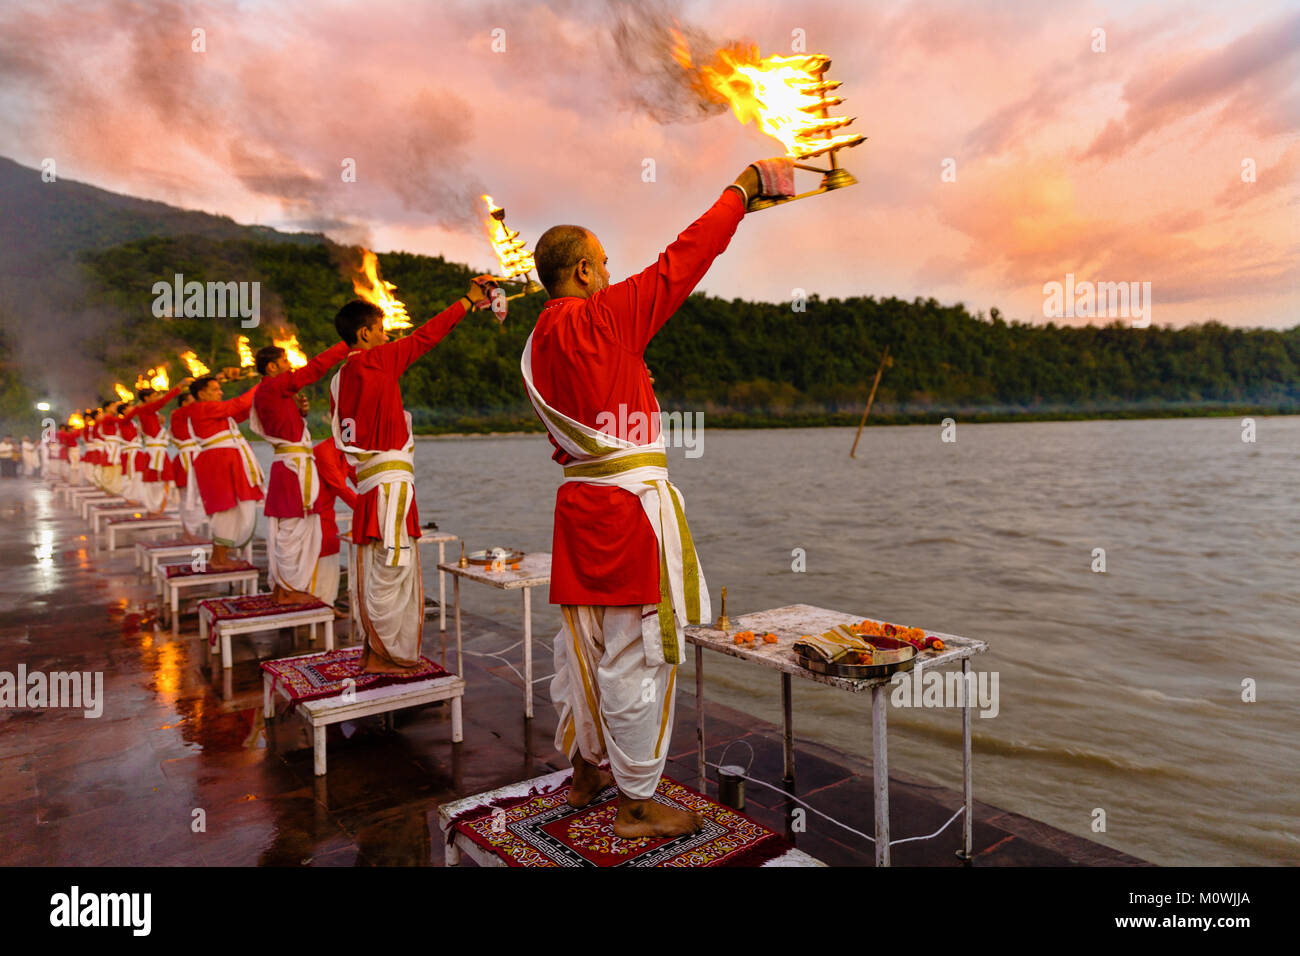 Rishikesh, Uttarakhand - August 03 2016: Priests in red robe in the holy city of Rishikesh in Uttarakhand, India during the evening light ceremony Stock Photo